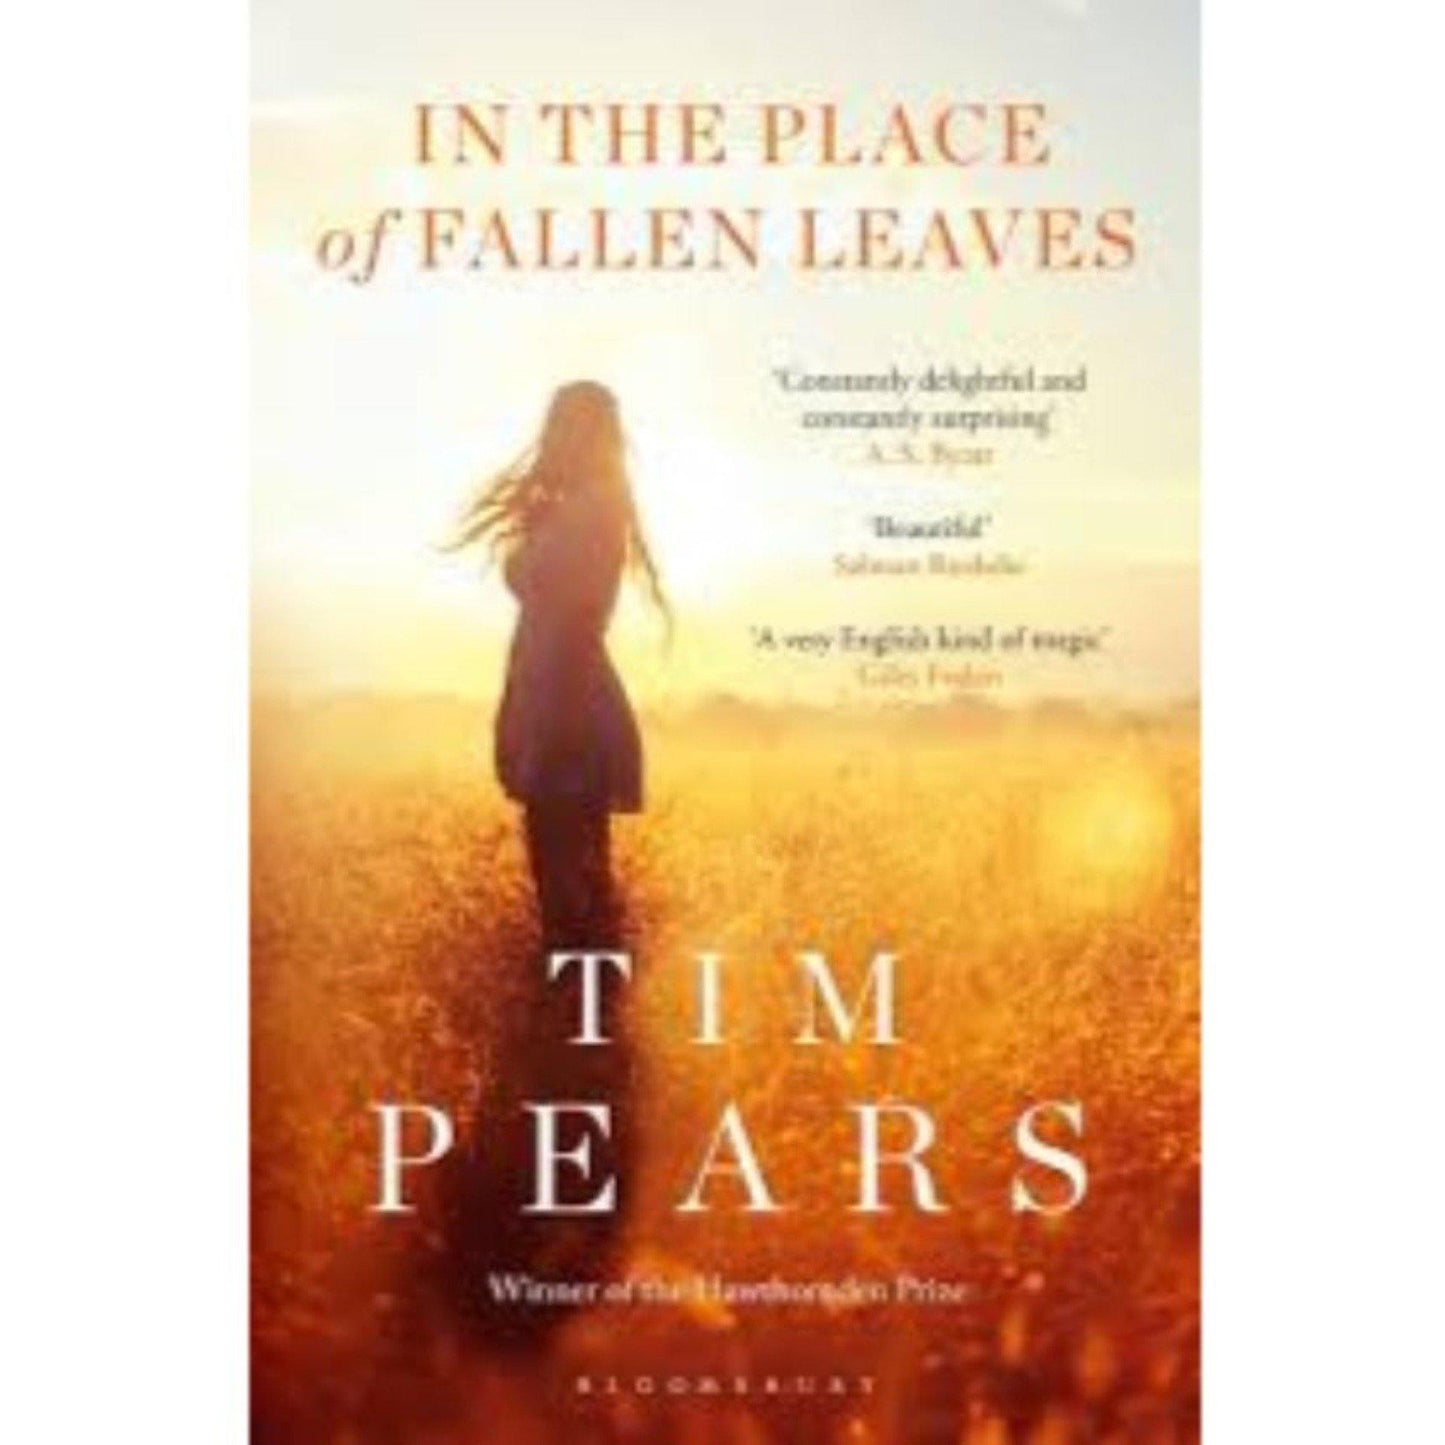 In The Place of Fallen Leaves by Tim Pears - Book A Book